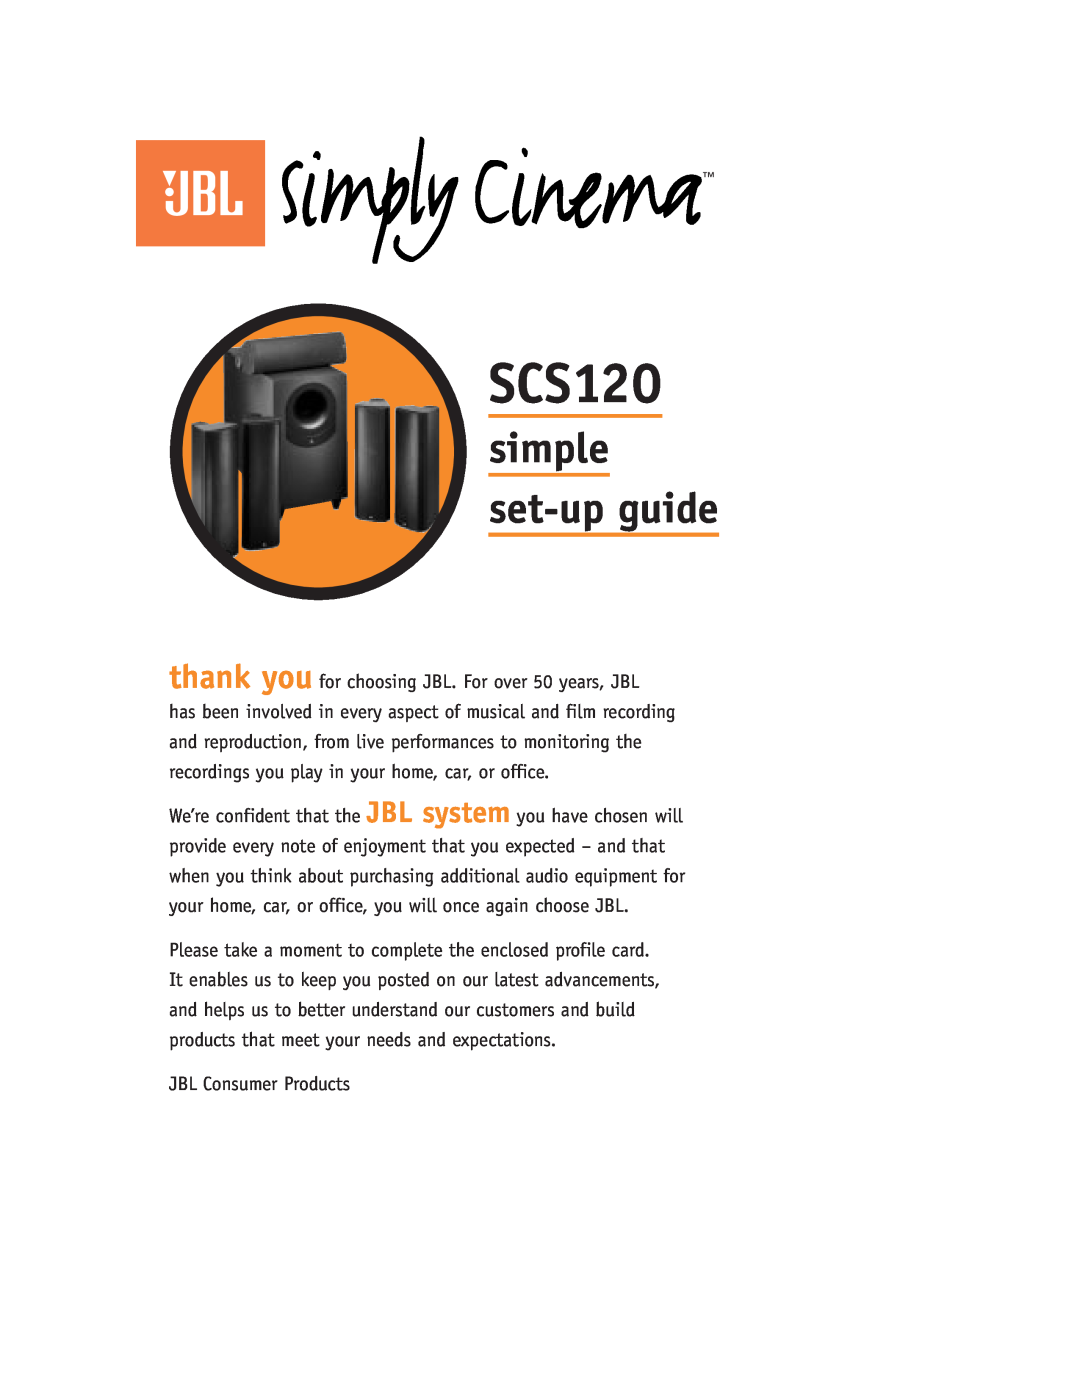 JBL SCS120 setup guide simple set-up guide, thank you for choosing JBL. For over 50 years, JBL, JBL Consumer Products 